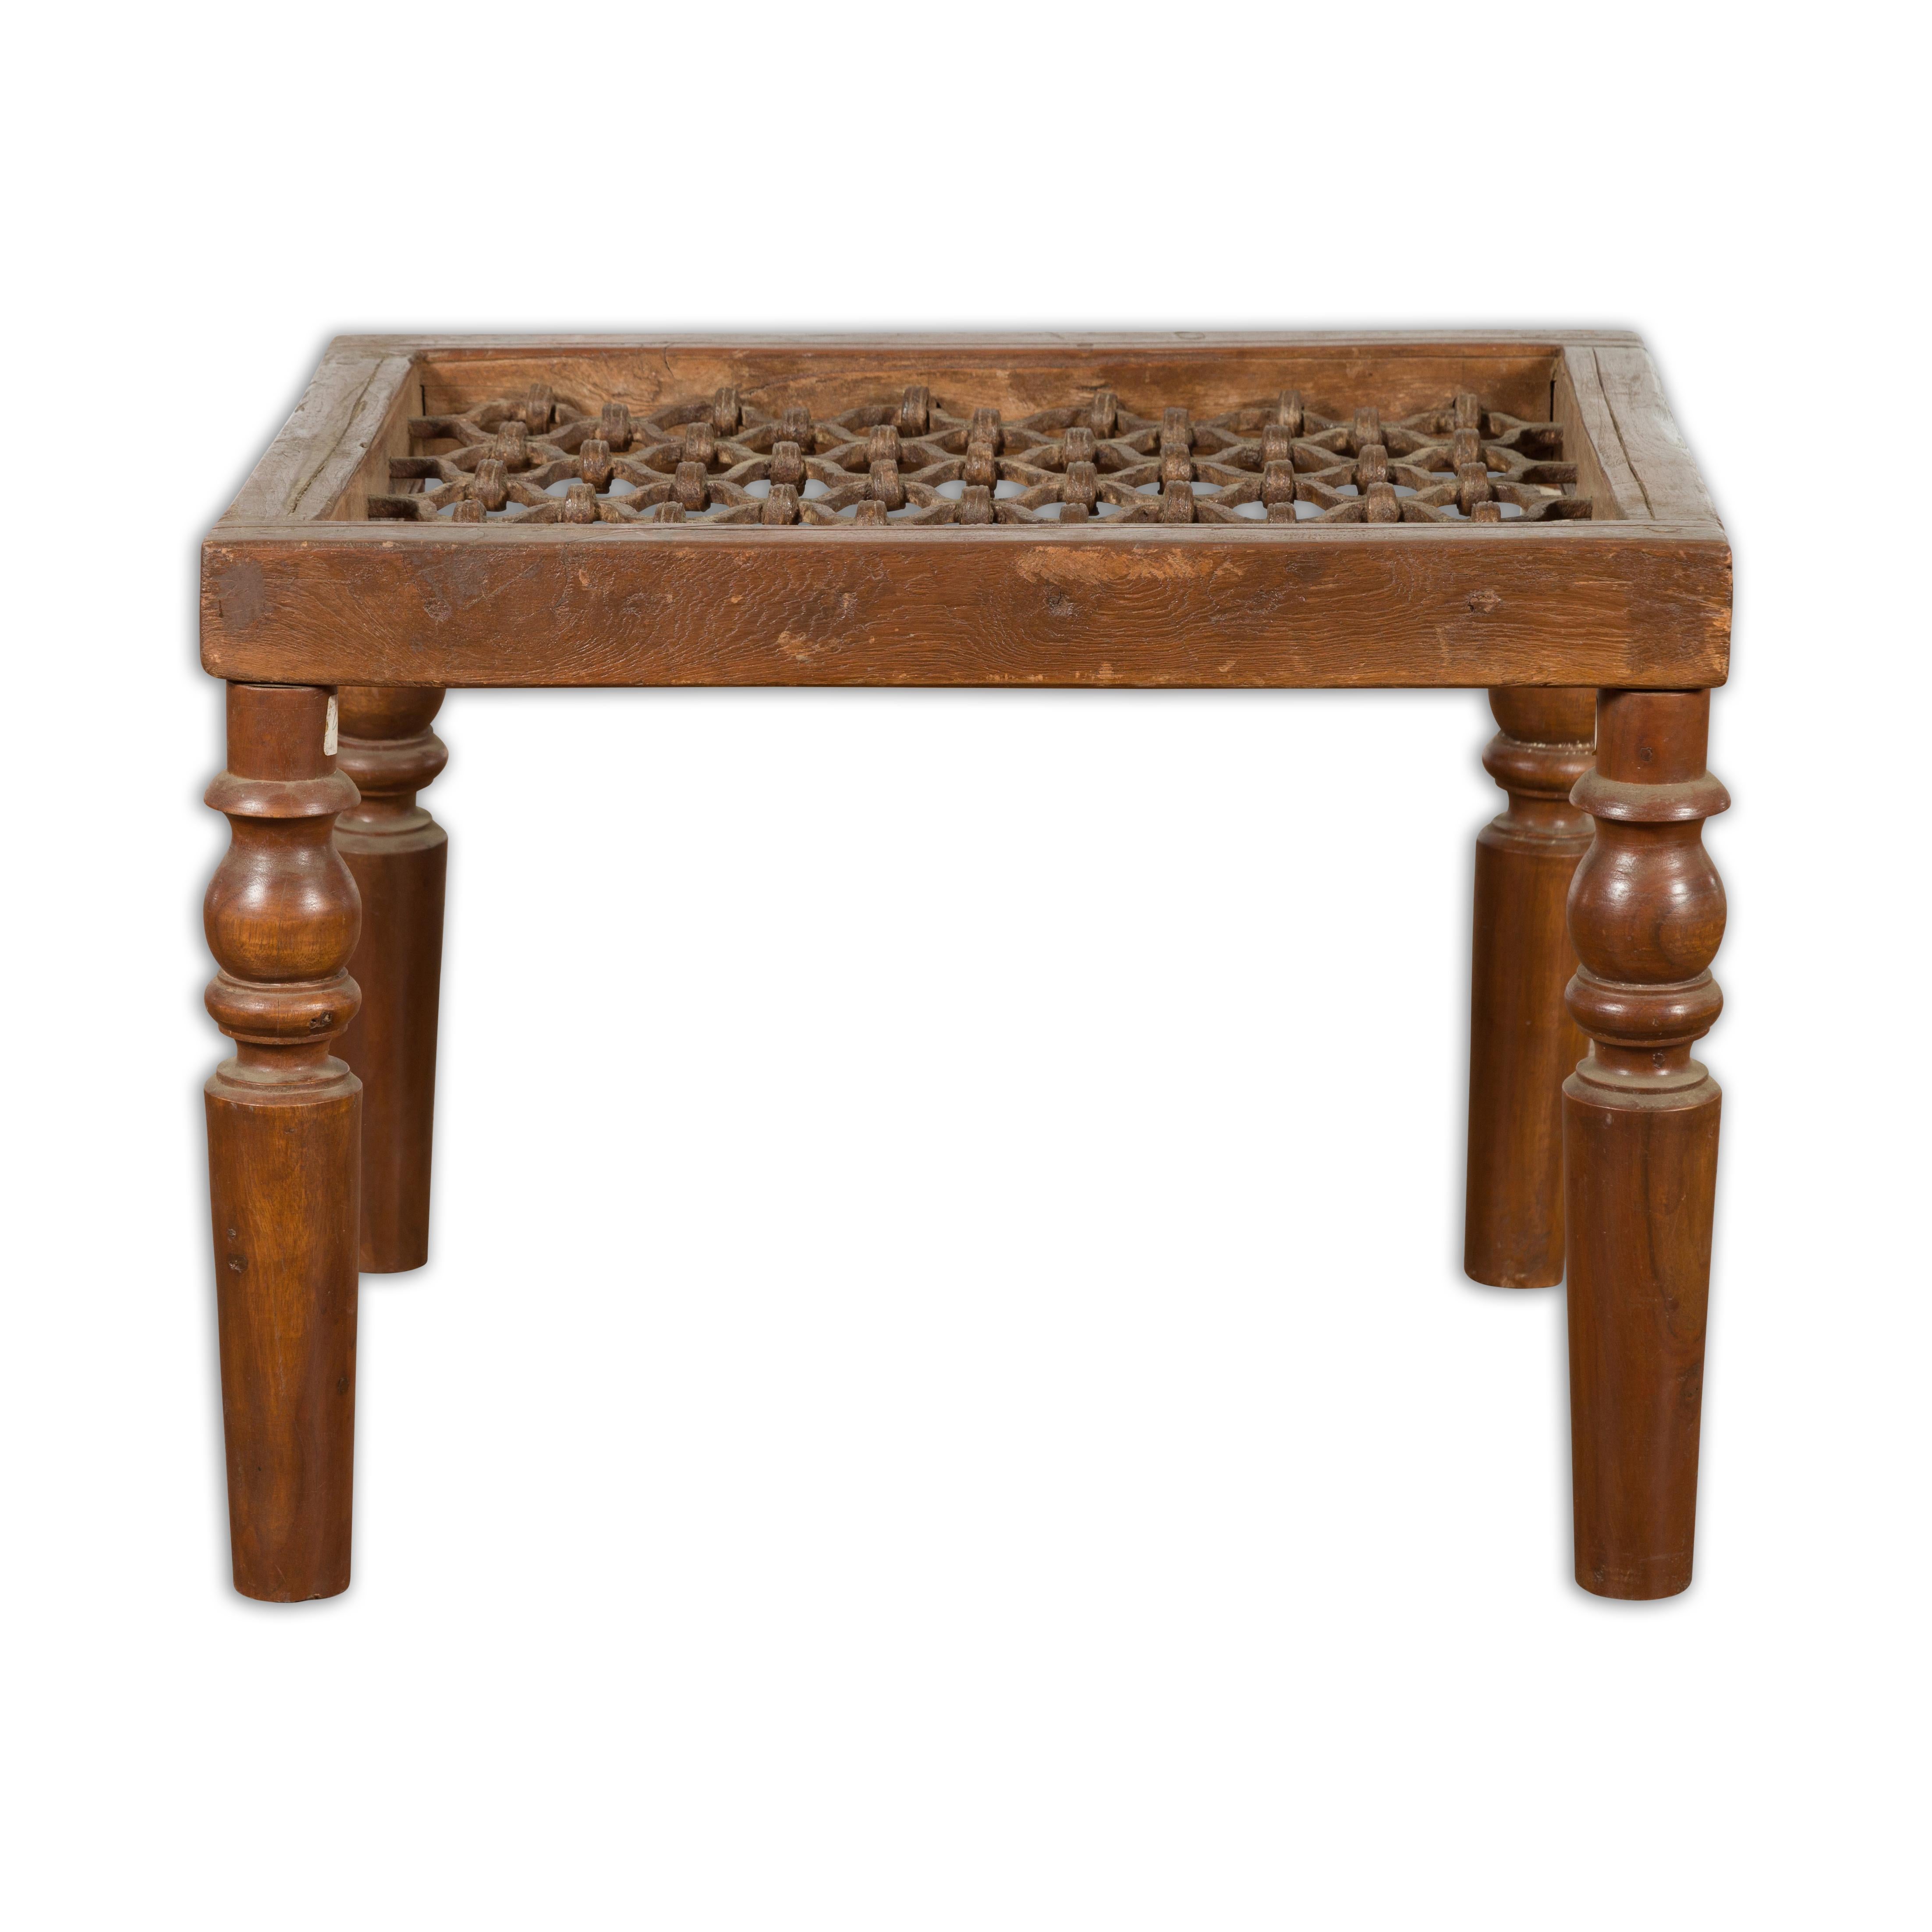 Indian Antique Window Grate Made into a Coffee Table with Turned Baluster Legs For Sale 8